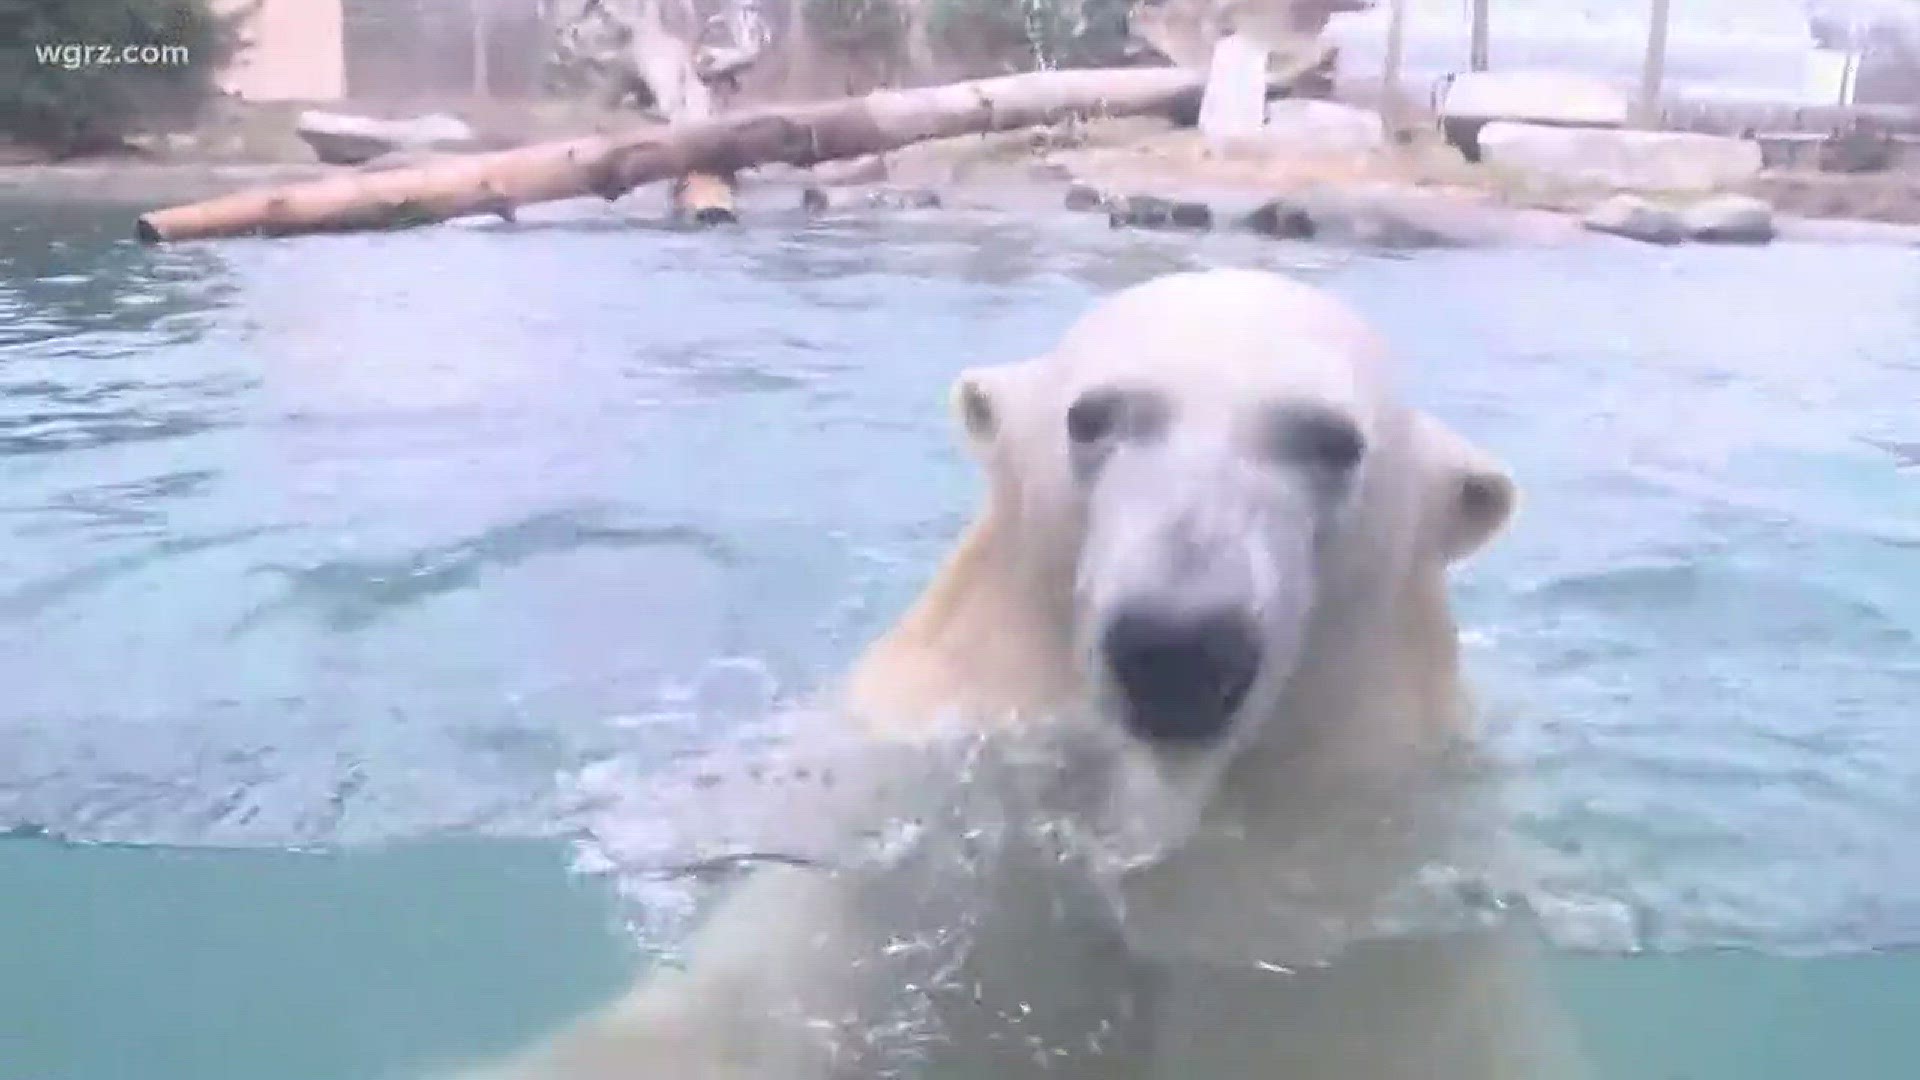 Daybreak's Joshua Robinson visited the Buffalo Zoo to find out more about their Polar Bear Days.